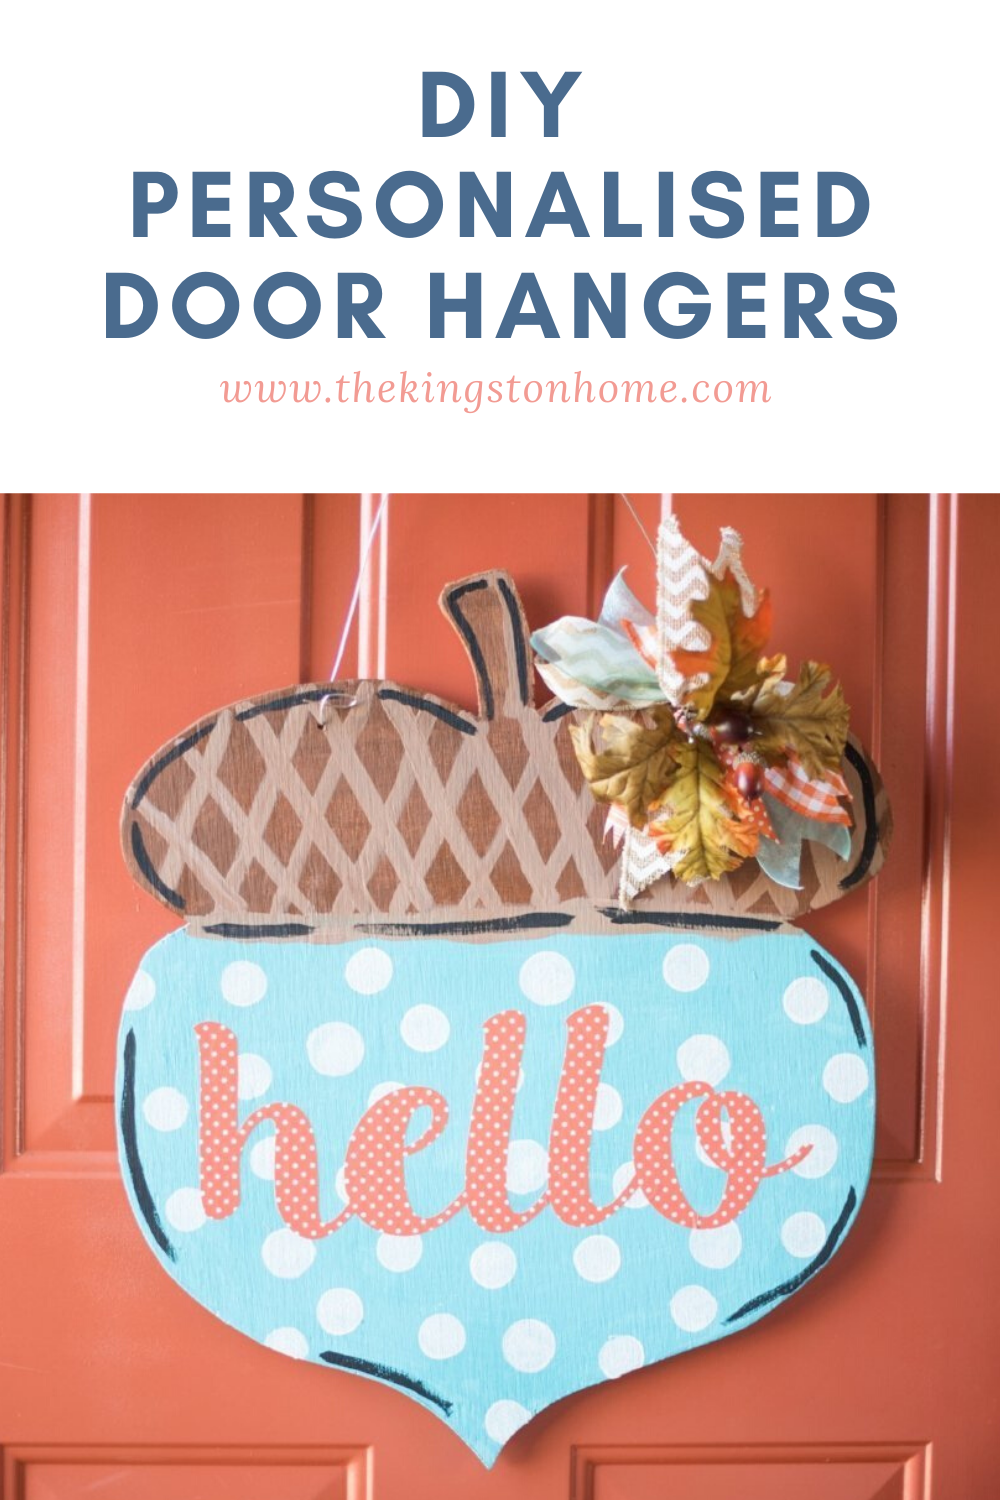 Personalized Door Hangers and How to Hang Them - The Kingston Home: In just a few minutes with your Cricut EasyPress you can personalize wood door hangers without worrying about your terrible handwriting! via @craftykingstons